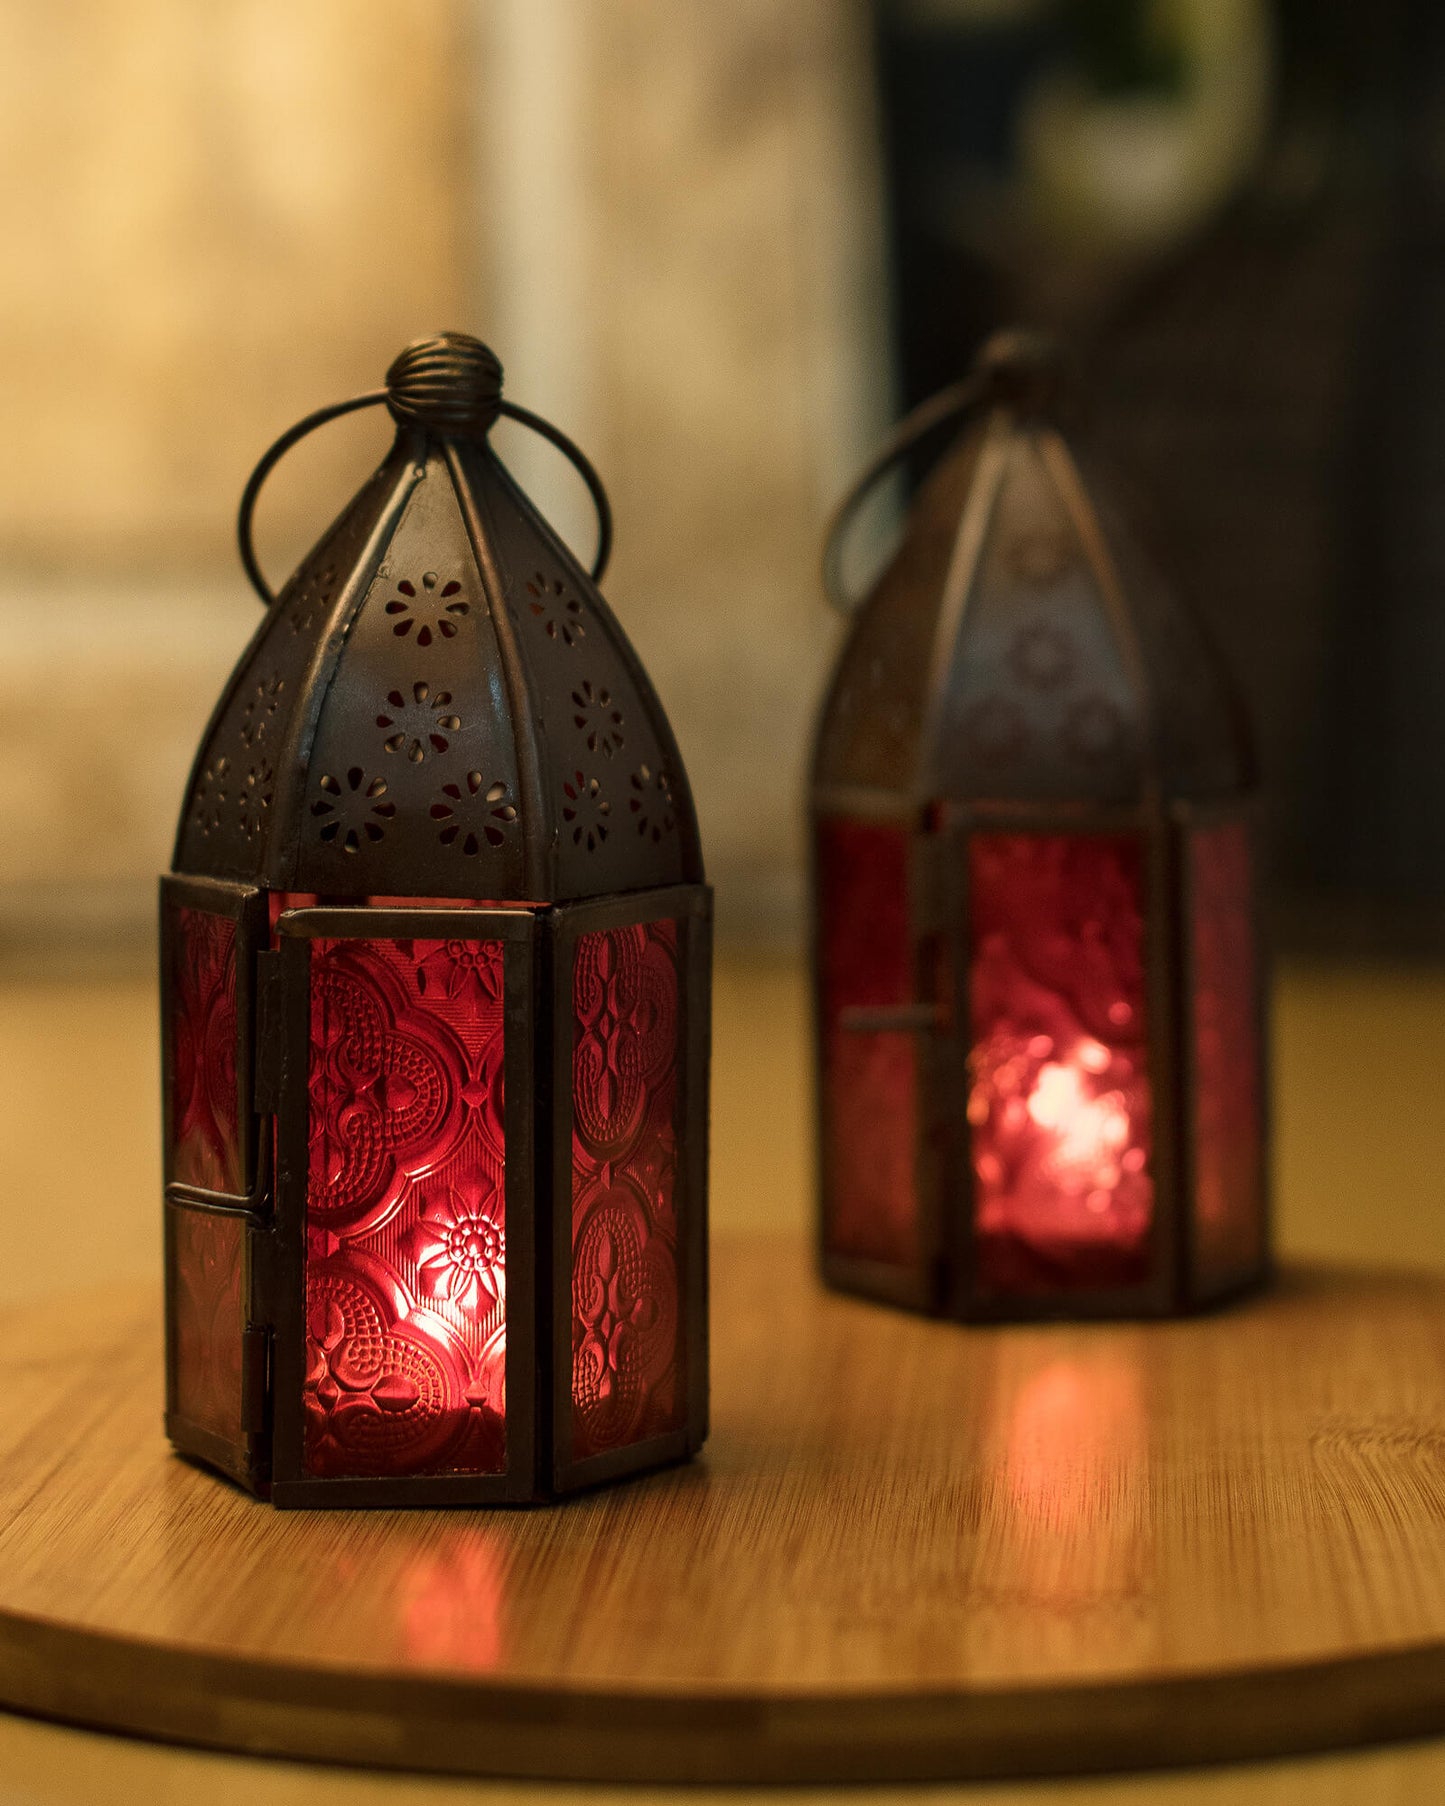 Metal Decorative Antique Copper Finish Moroccan Lantern Candle Holder, Set of 2, Tealight Hanging Home Office Decor